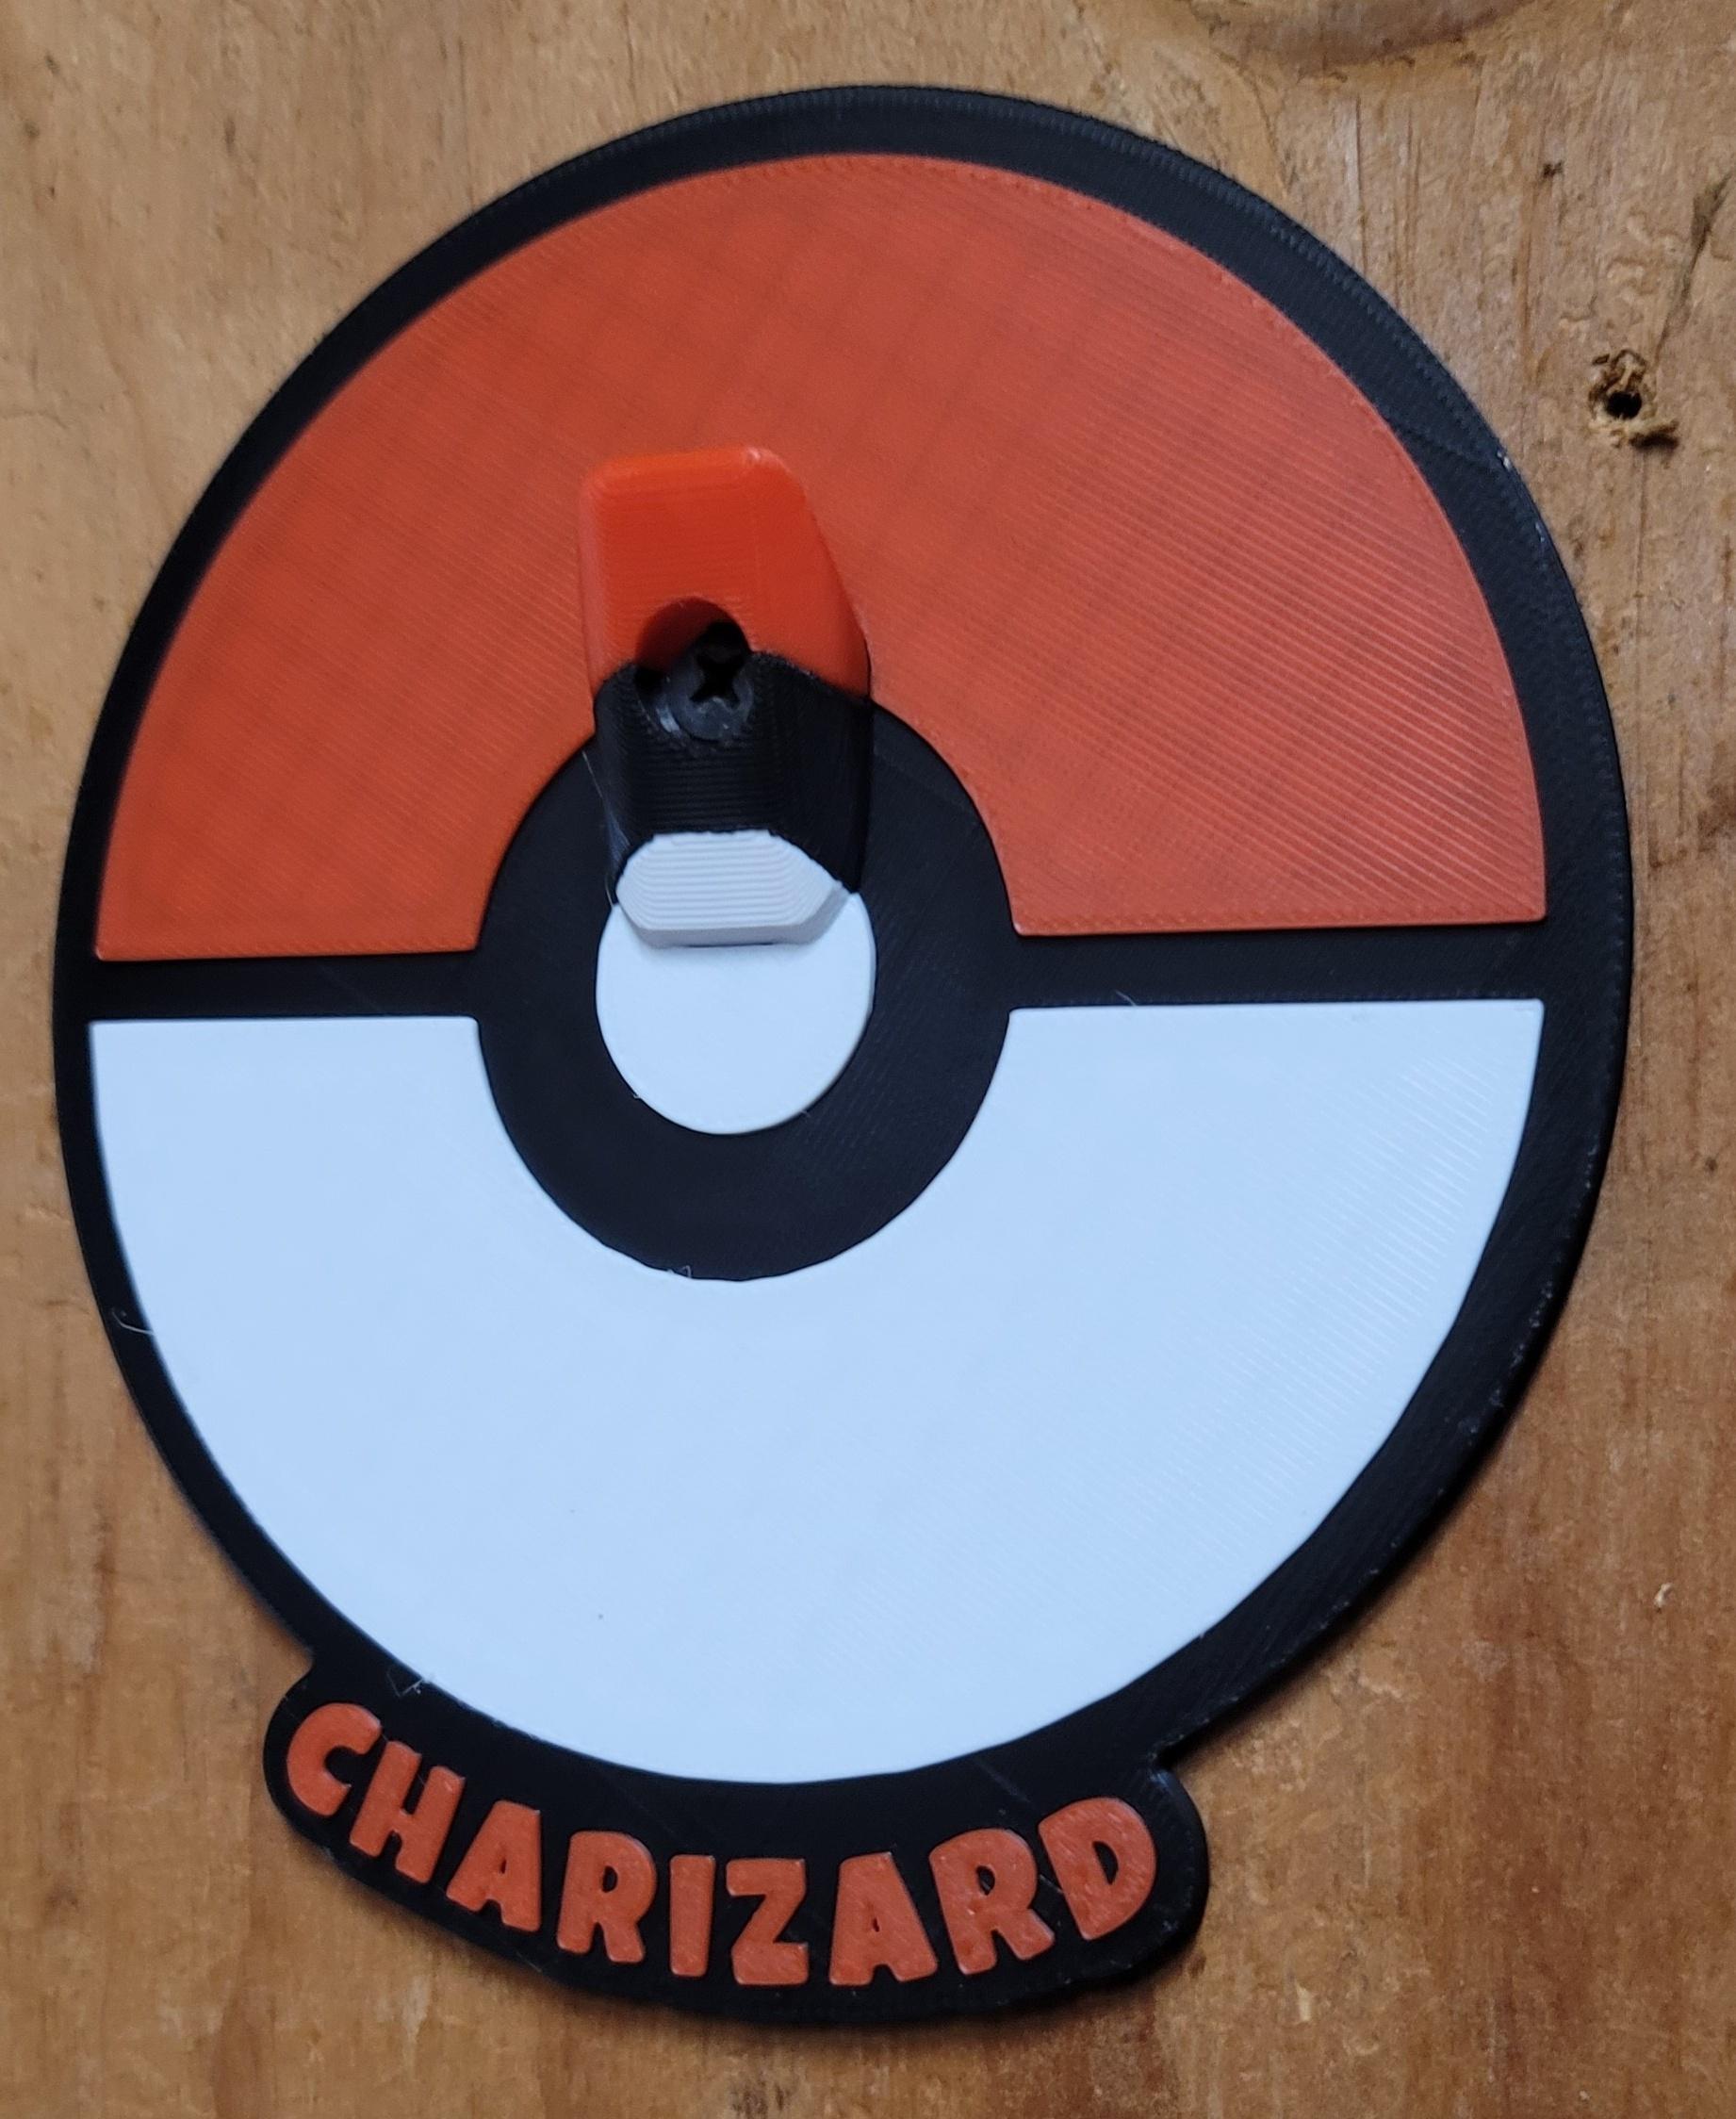 Charizard Wall Dice tower 3d model